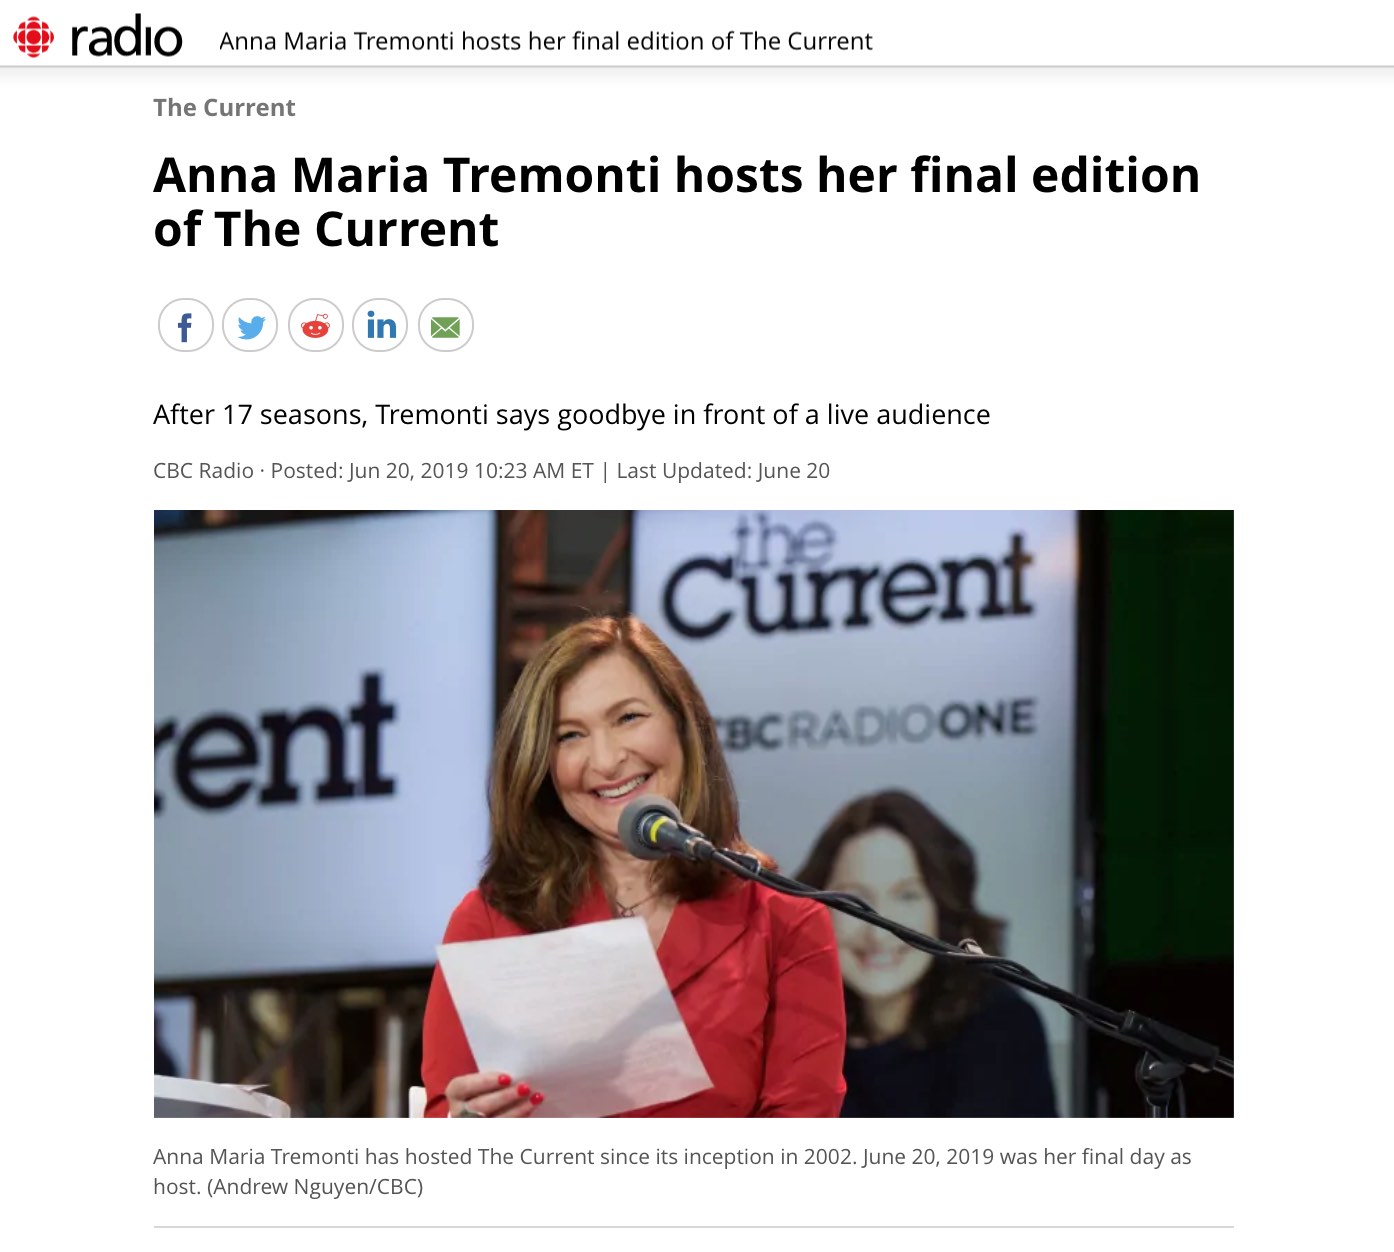 20190619 Anna Maria Tremonti's final edition of The Current